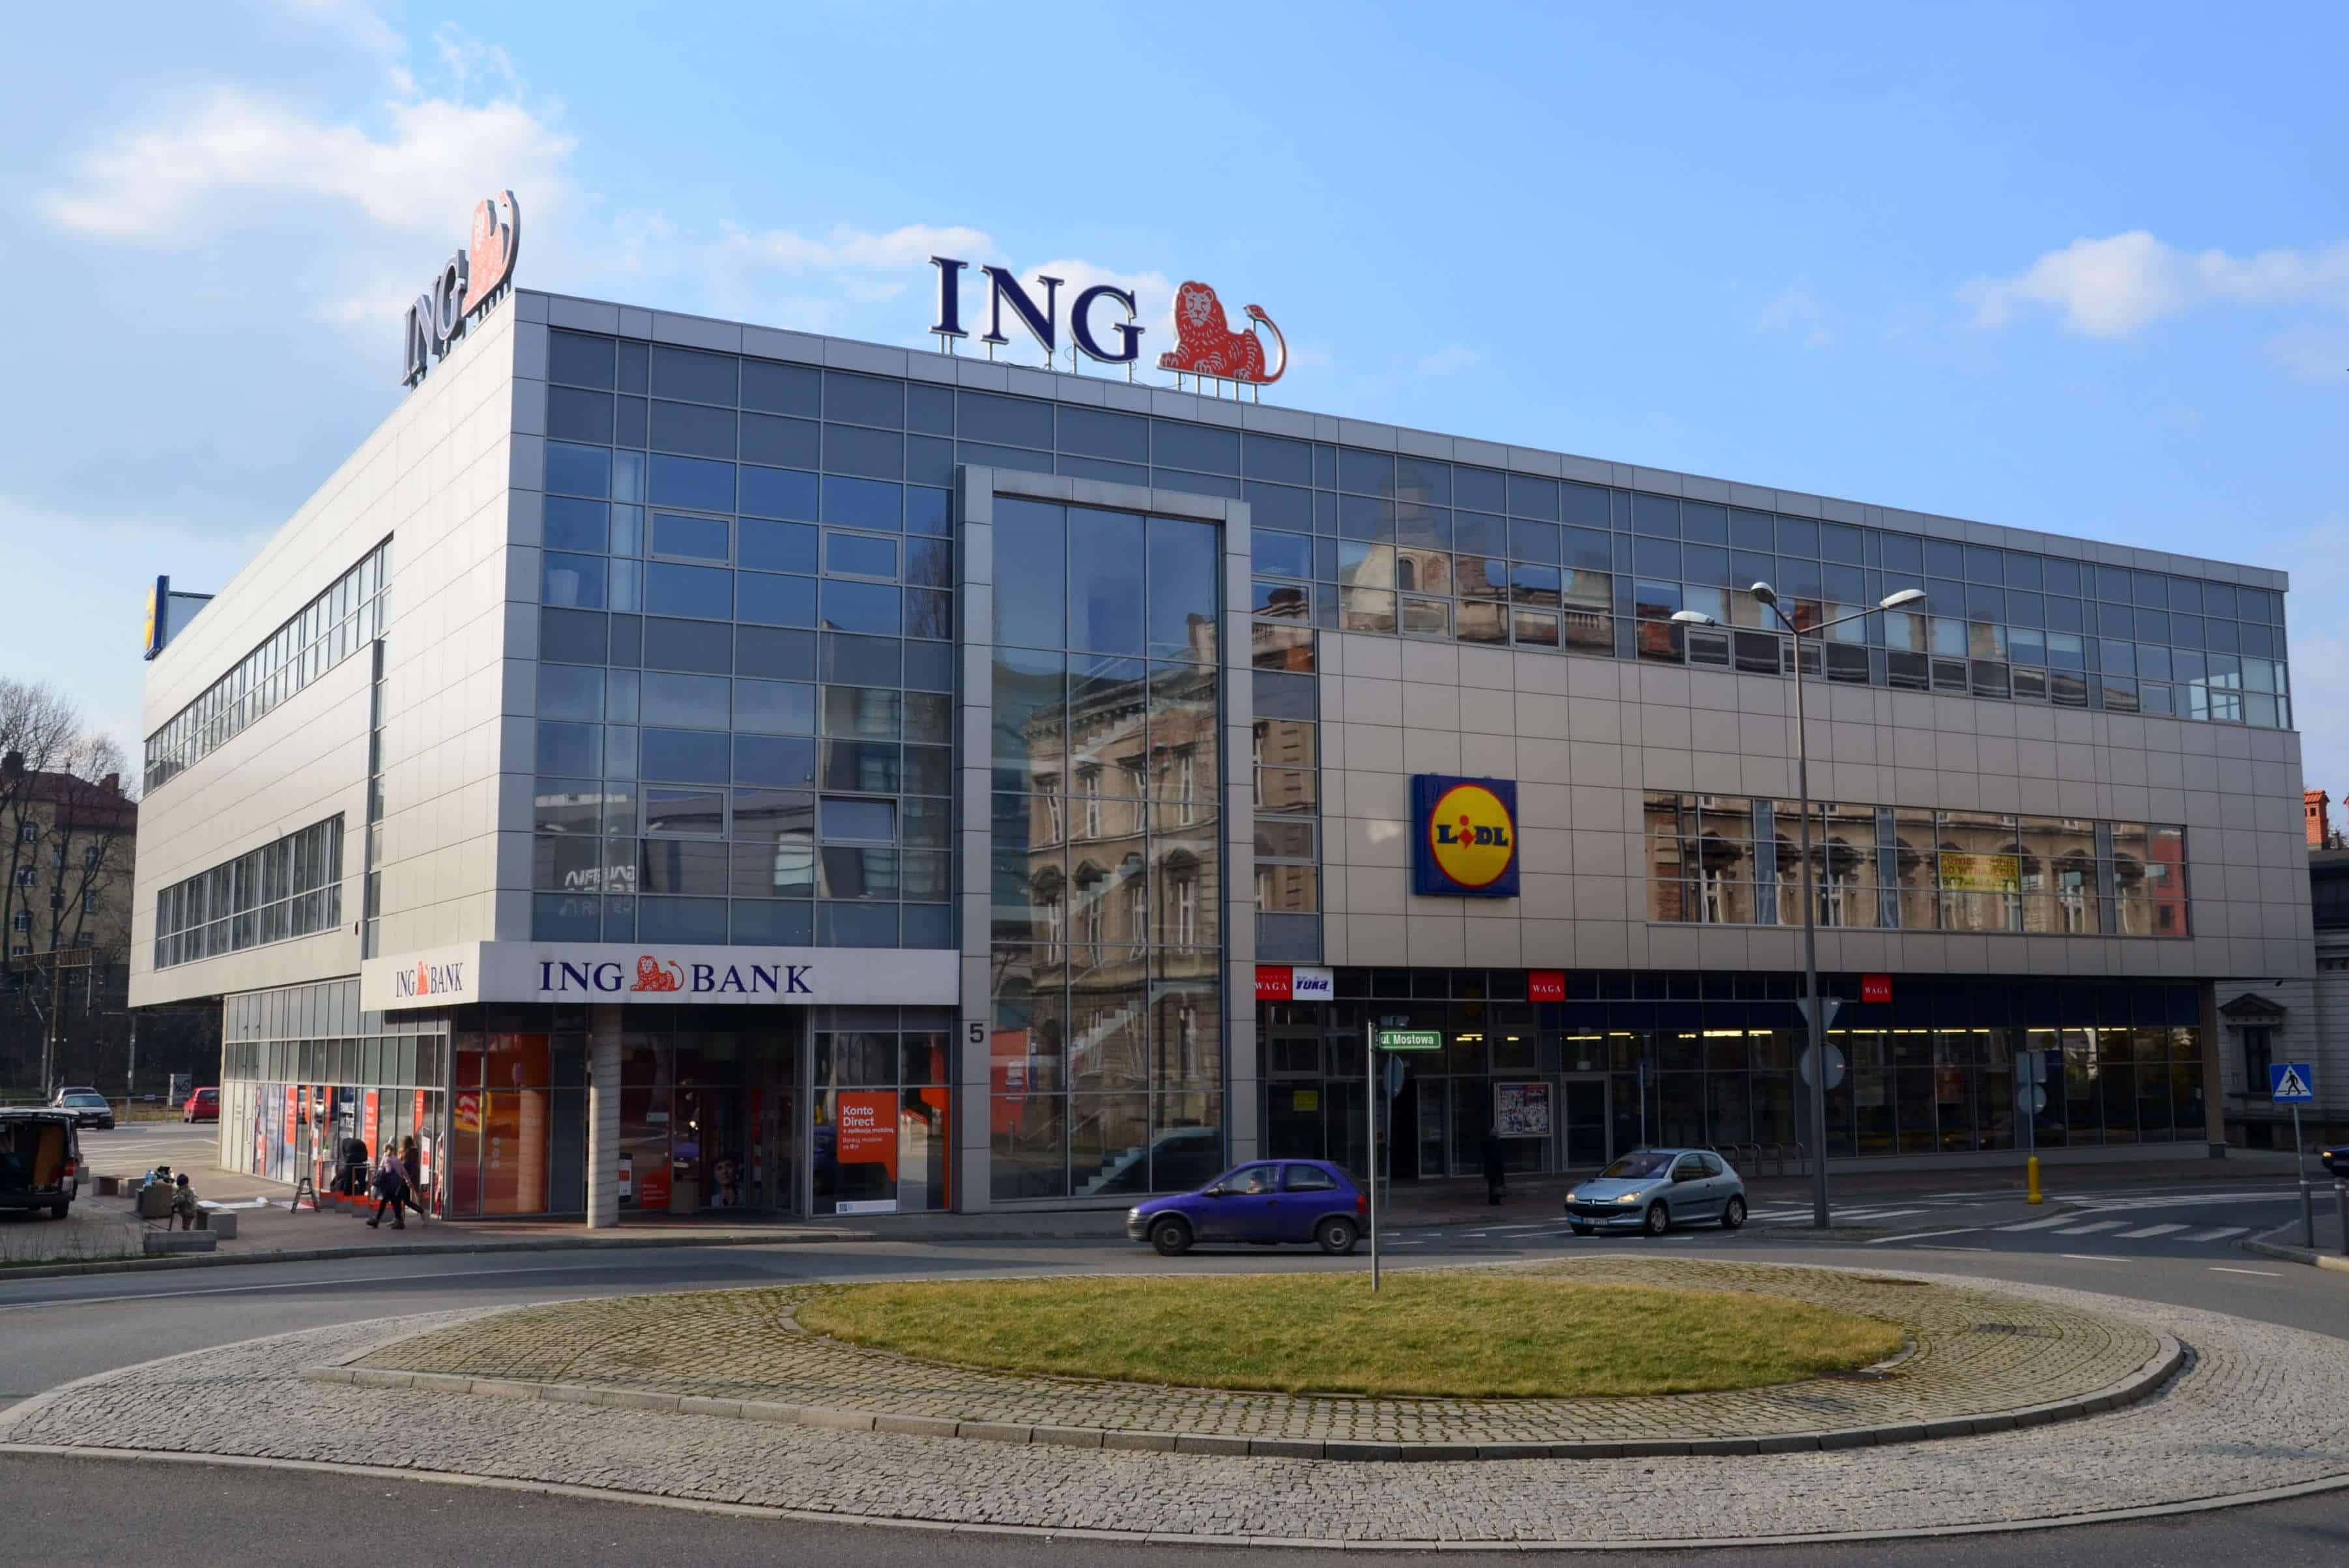 ING Bank Working on a Crypto Custody Project for Digital Assets